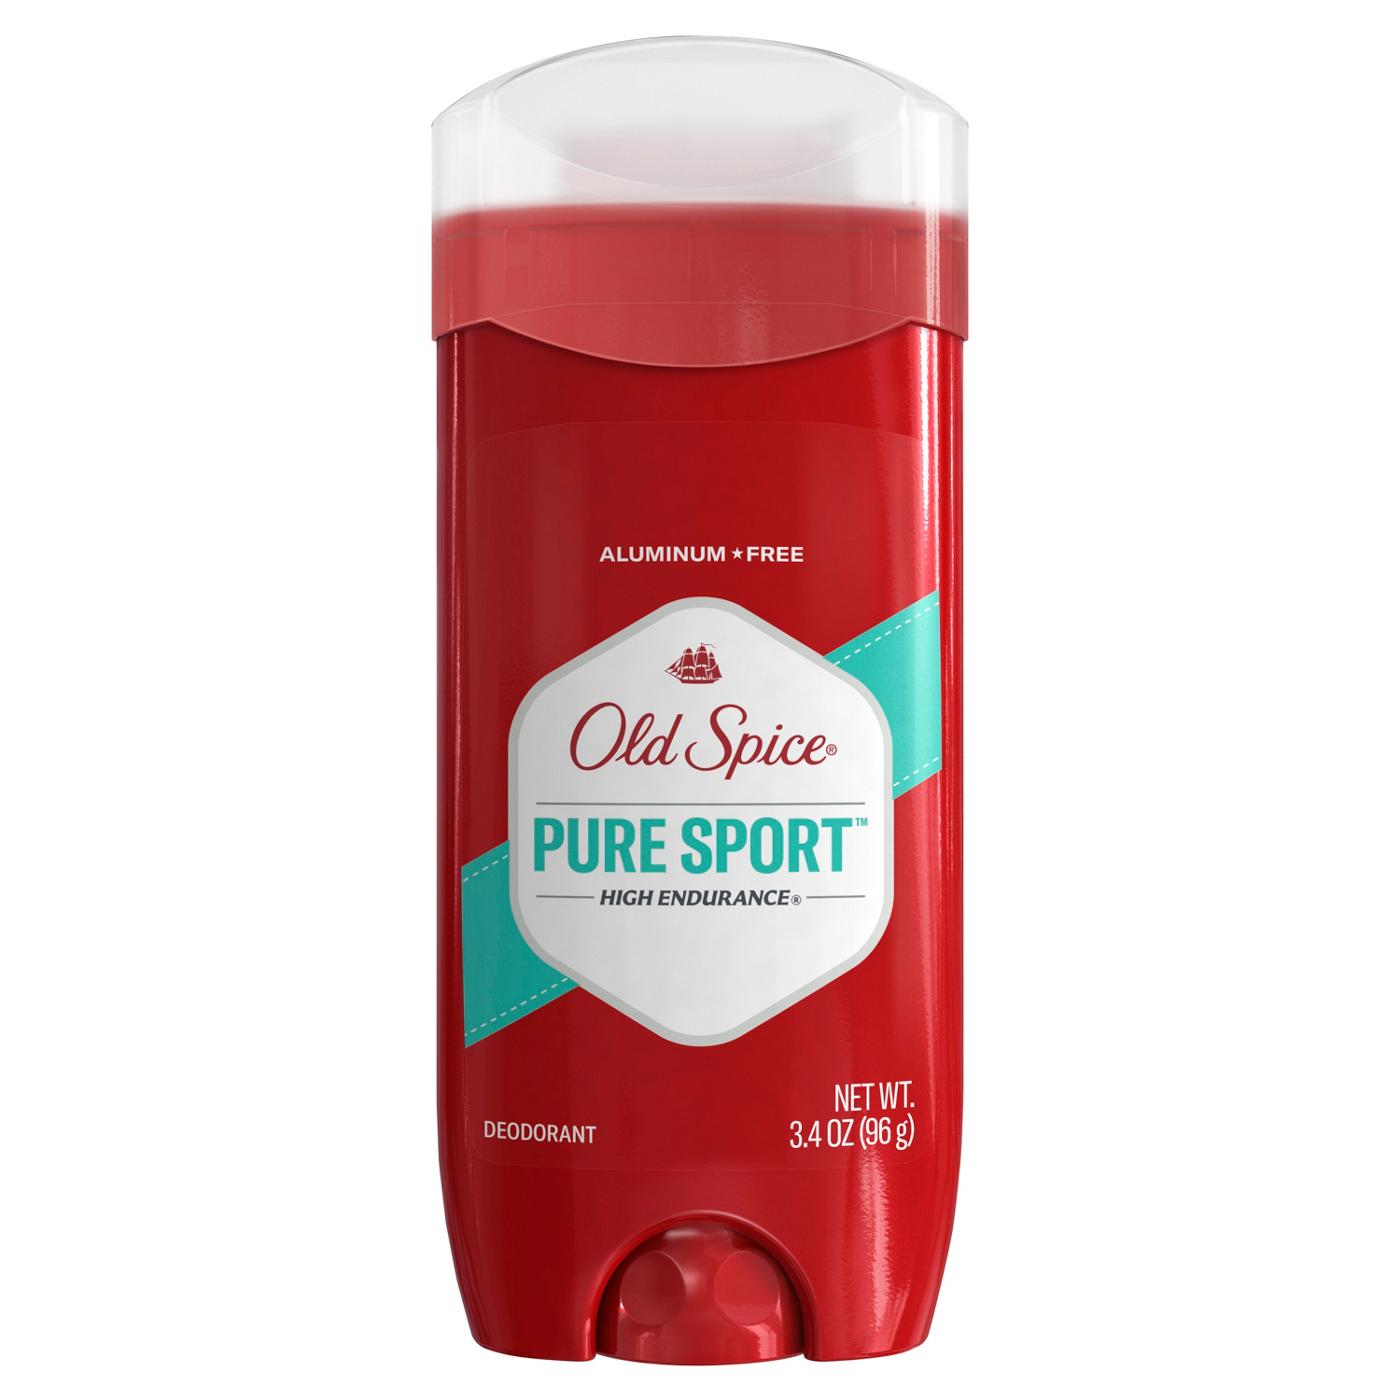 Old Spice Deodorant - Pure Sport; image 1 of 2